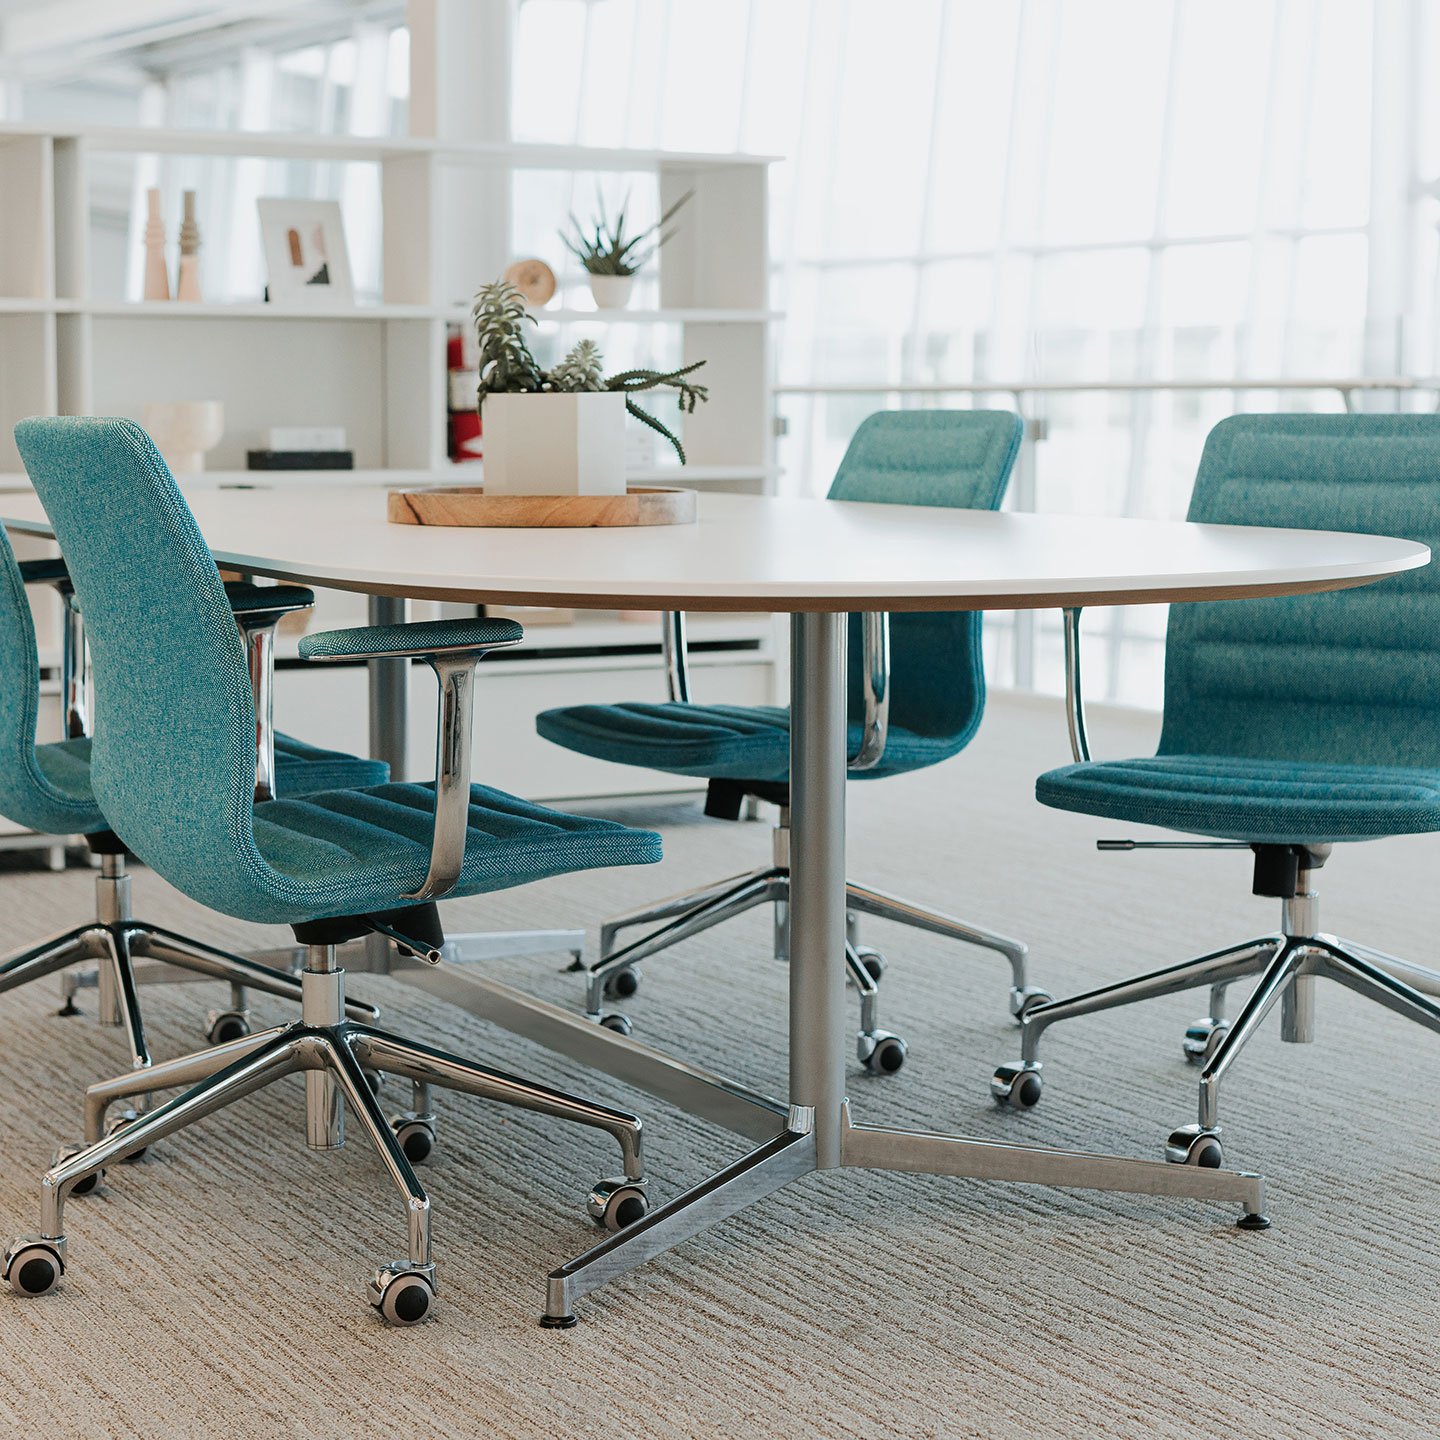 Haworth Jive Table with white top in an open office collaborative setting 